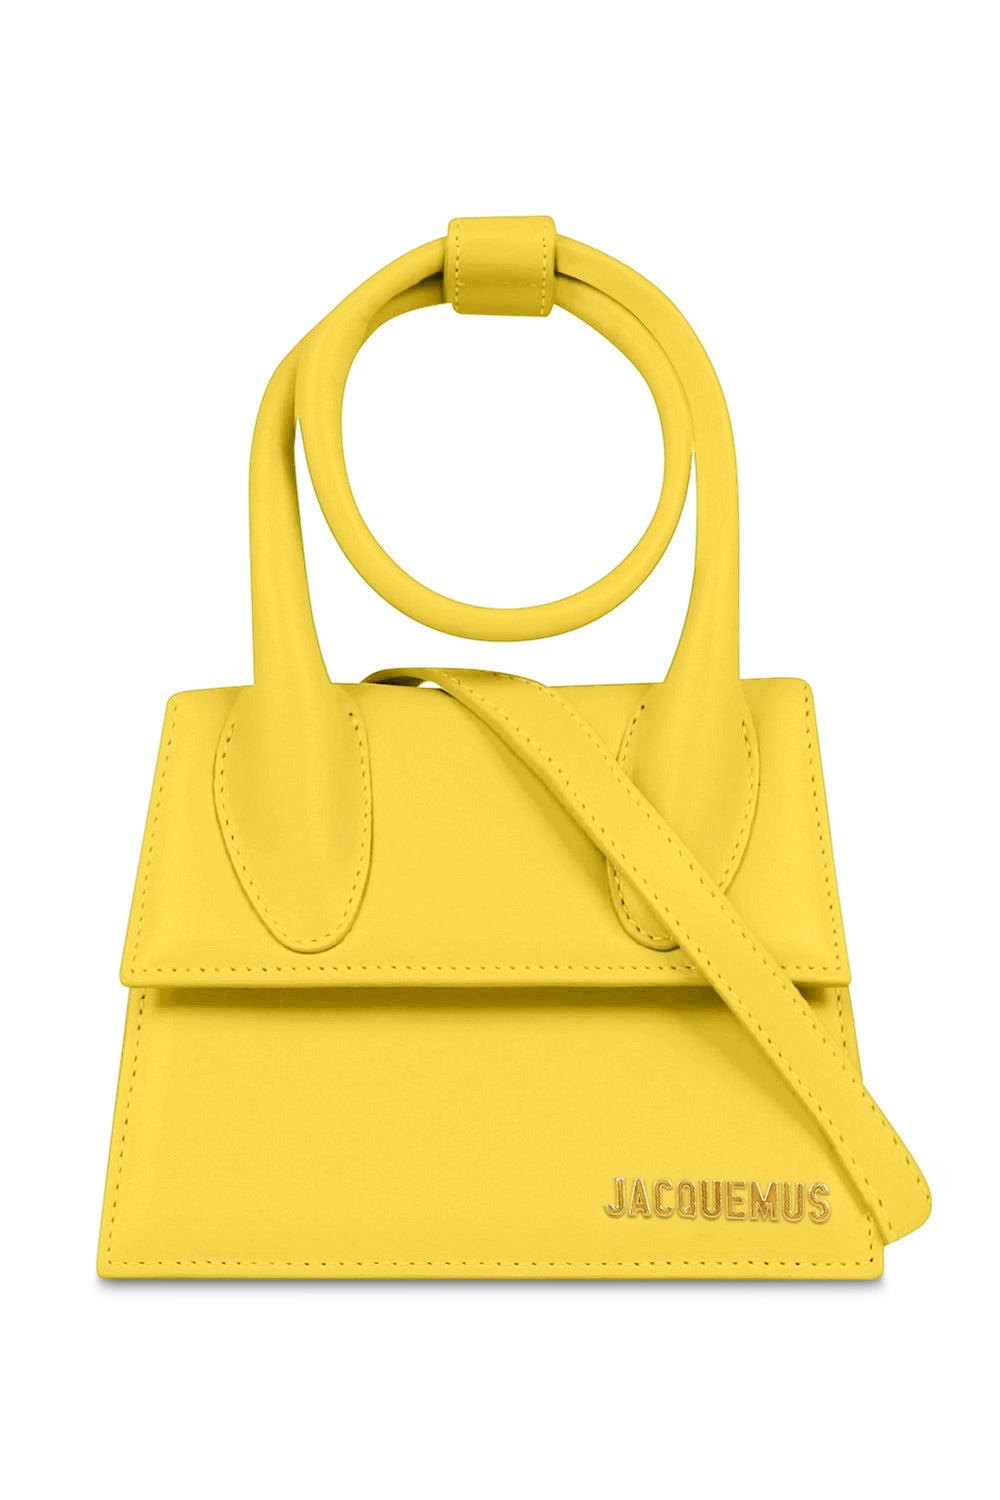 JACQUEMUS BAGS YELLOW LE CHIQUITO NOEUD BAG | YELLOW